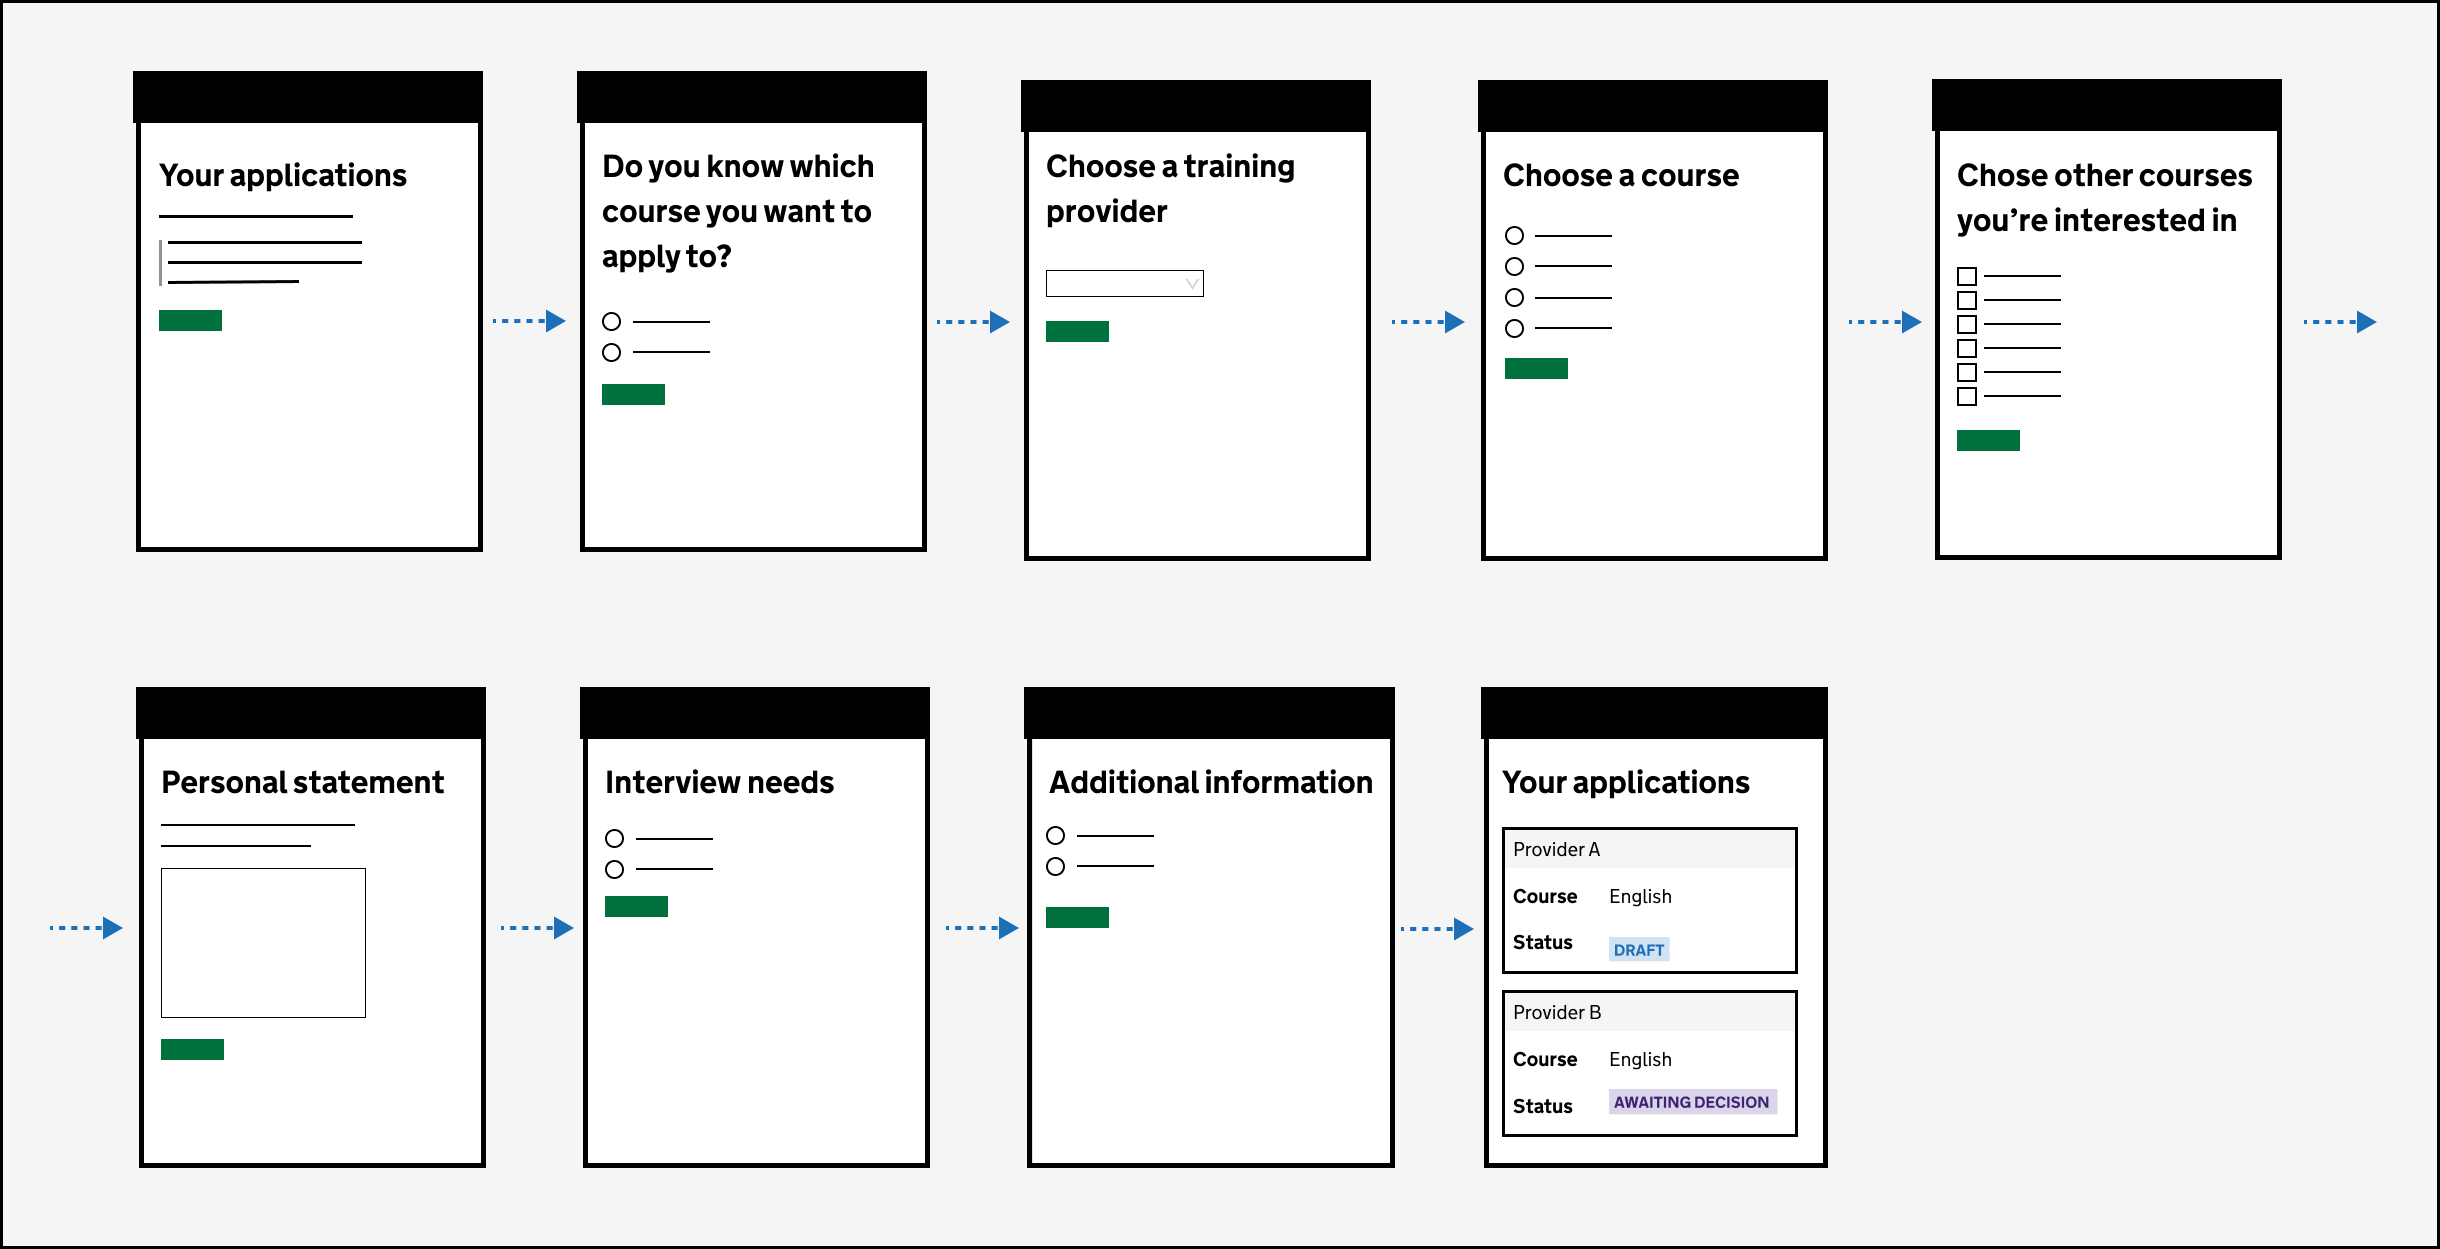 Illustration showing 9 screens leading on from each other. The screens show a flow the user would take to choose a teacher training course from choosing a training provider, choosing a course, choosing additional courses, writing their personal statement, indicacting their interveiw needs, adding extra information and submitting their application.